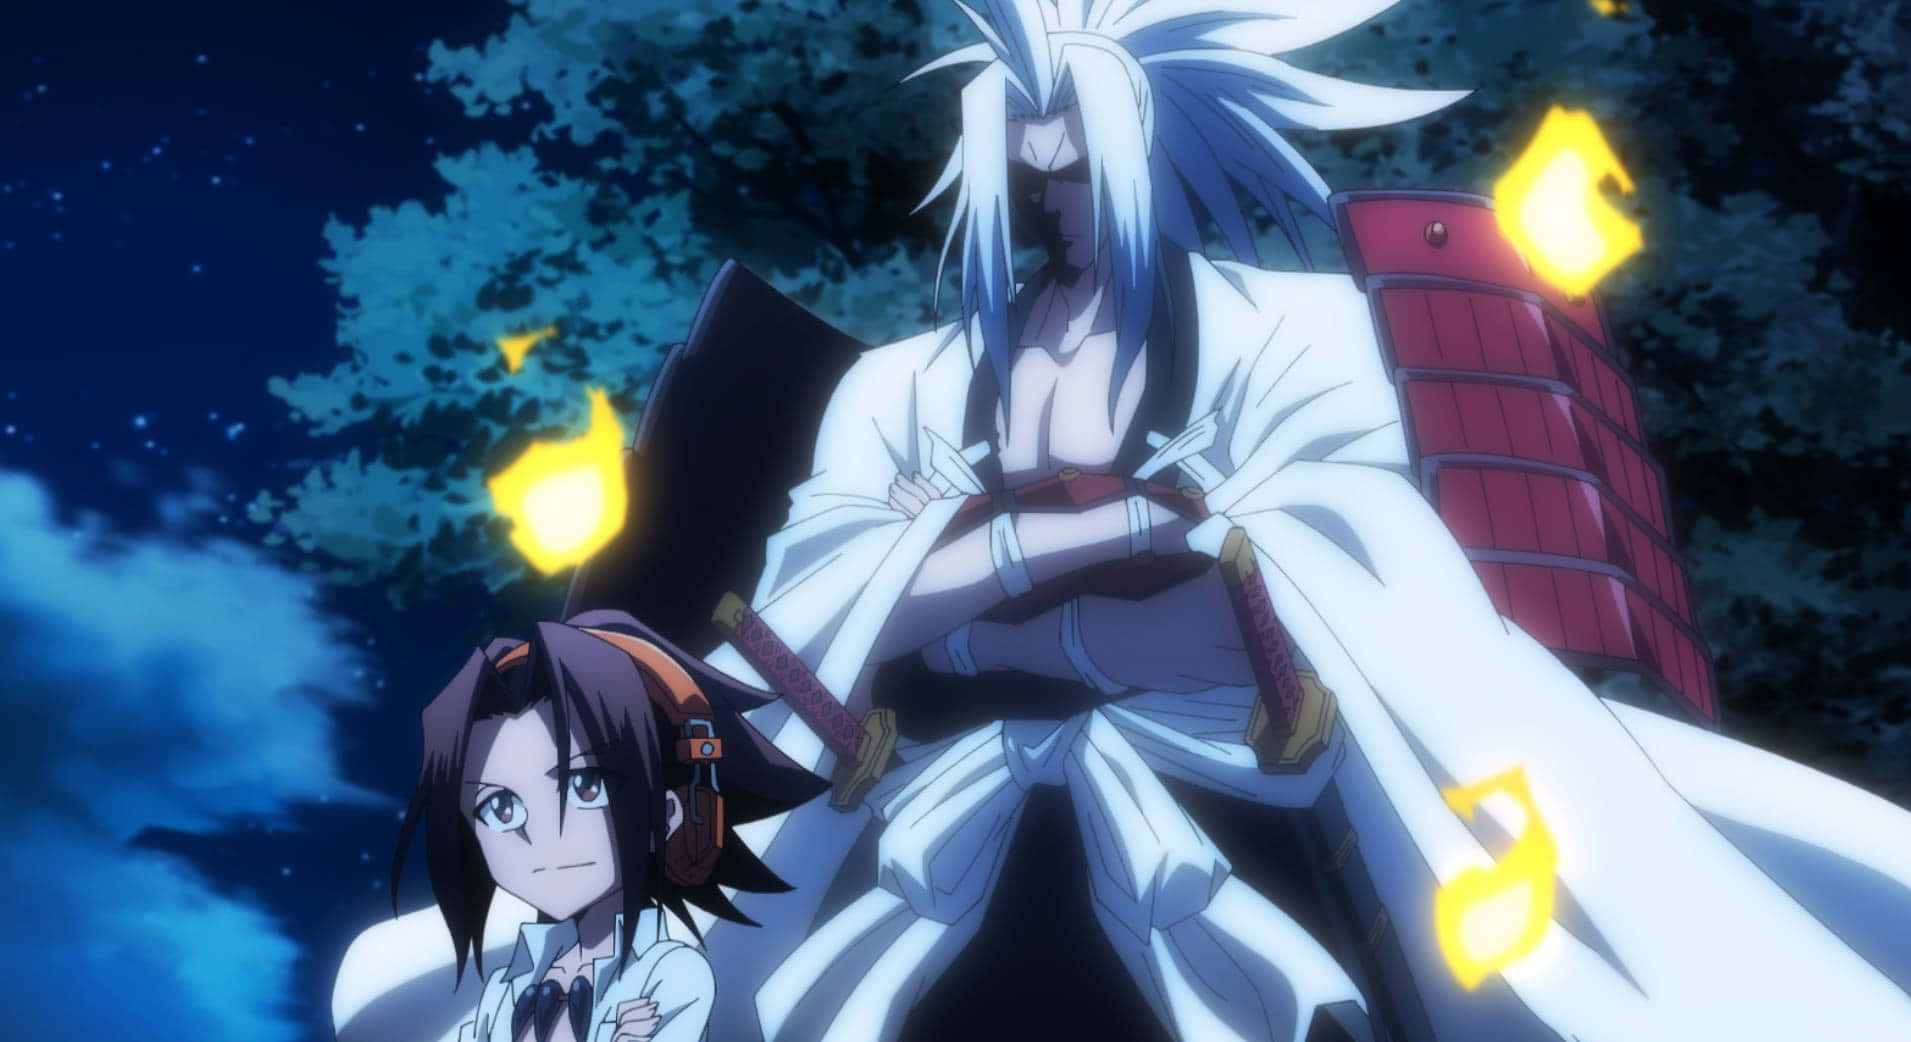 Download Join Shaman King's Anime Adventure